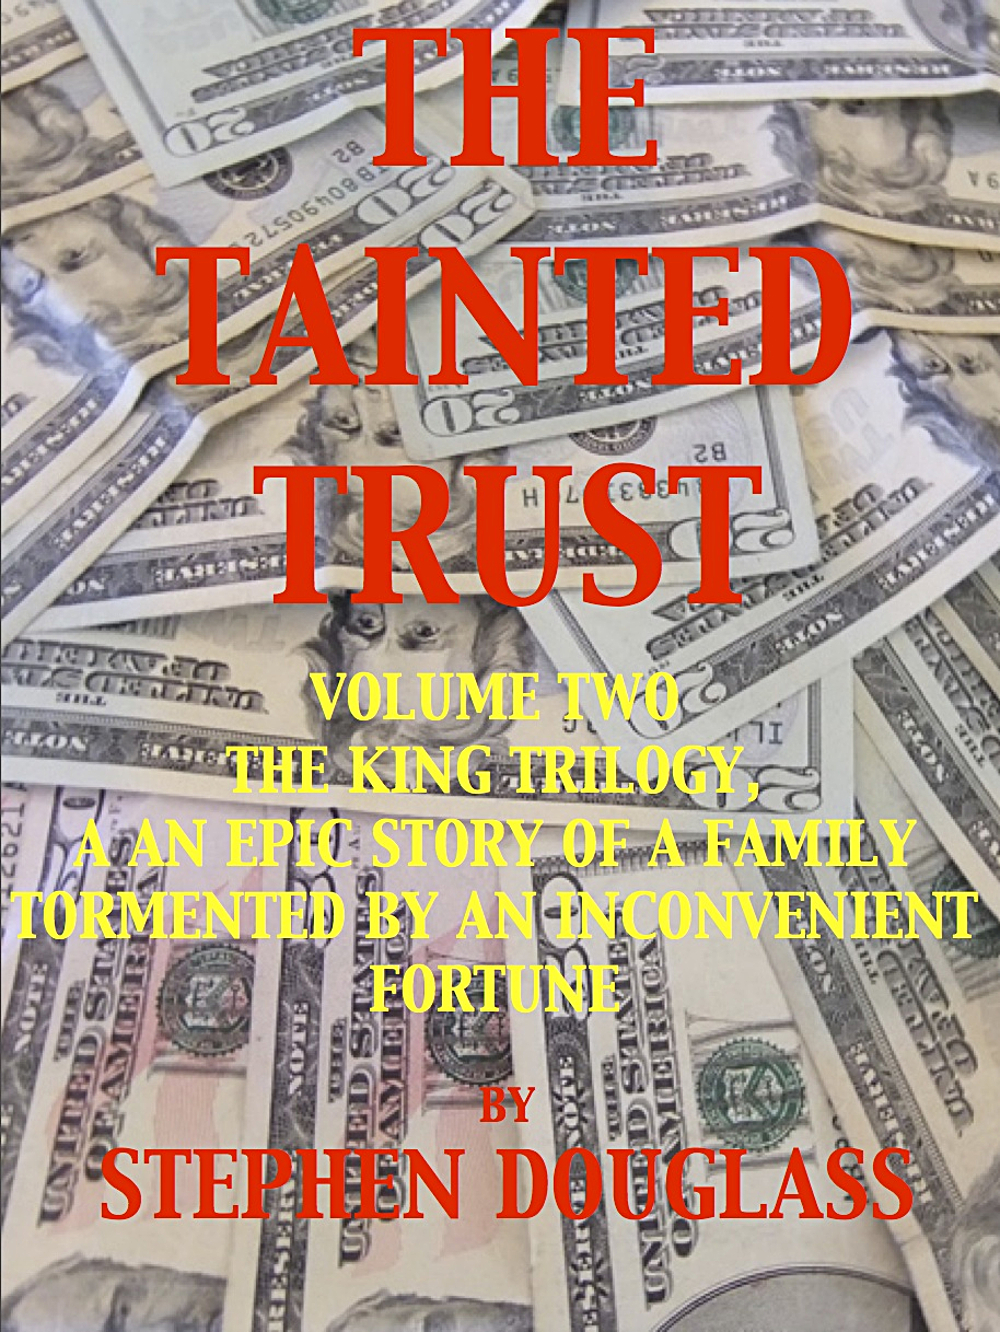 The Tainted Trust